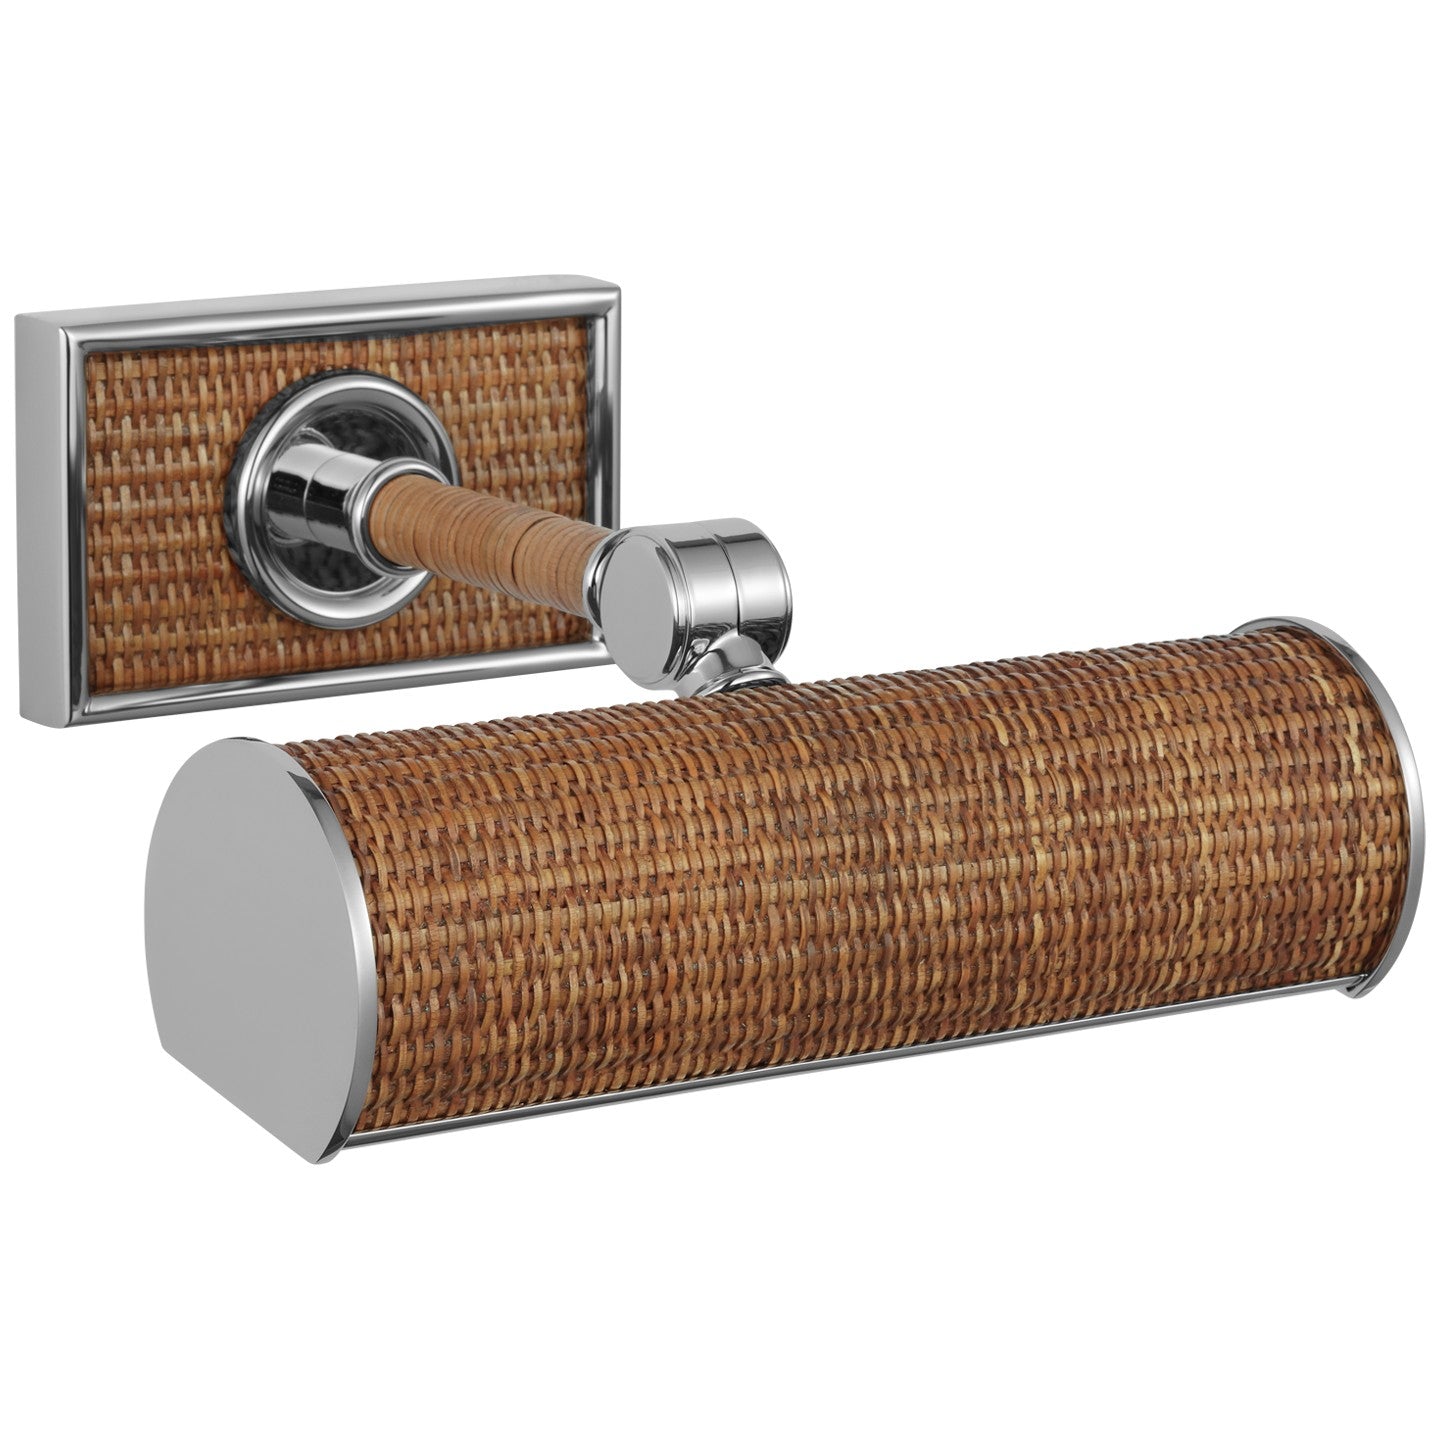 Visual Comfort Signature - CHD 2580PN/NRT - LED Picture Light - Halwell - Polished Nickel and Natural Woven Rattan